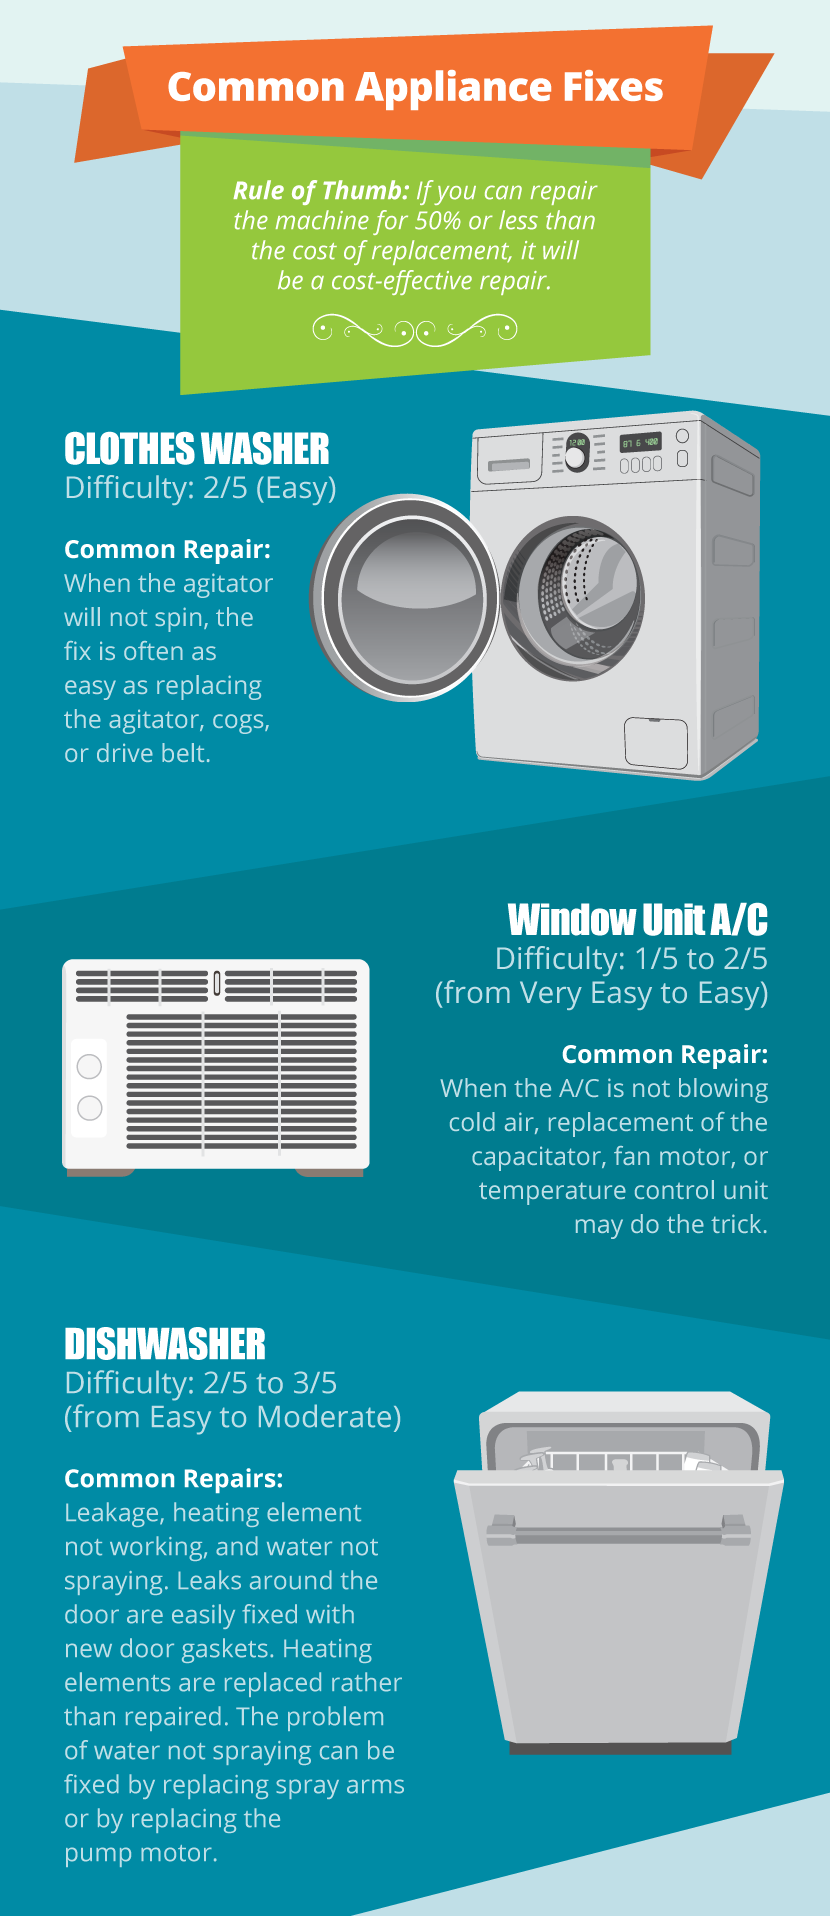 Is It More Eco-Friendly to Repair, Replace, or Recycle Appliances?